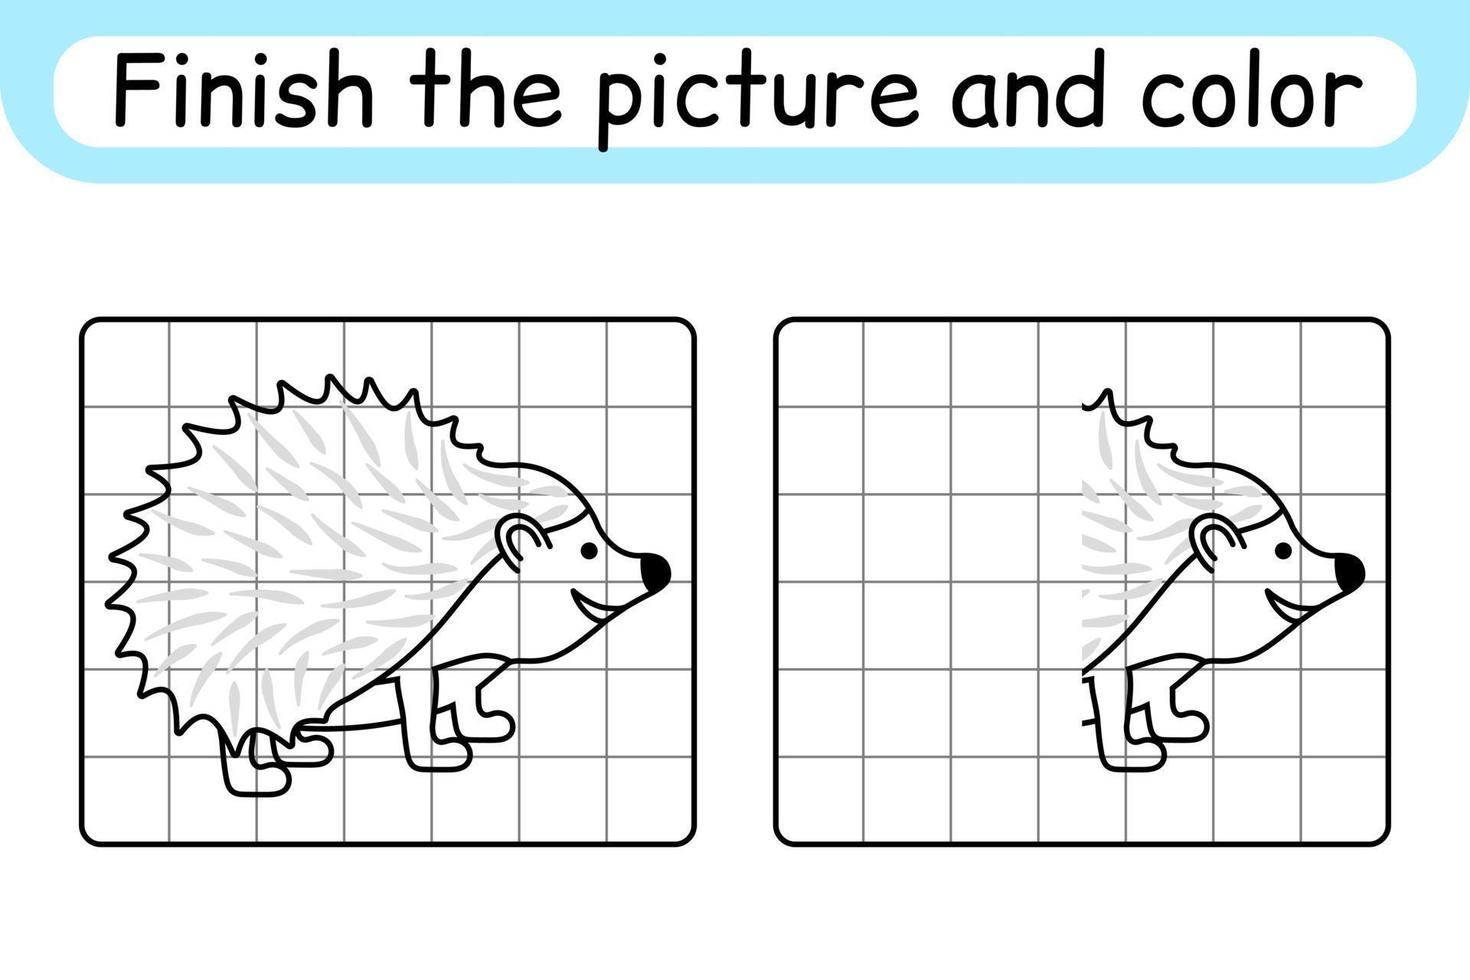 Complete the picture hedgehog. Copy the picture and color. Finish the image. Coloring book. Educational drawing exercise game for children vector